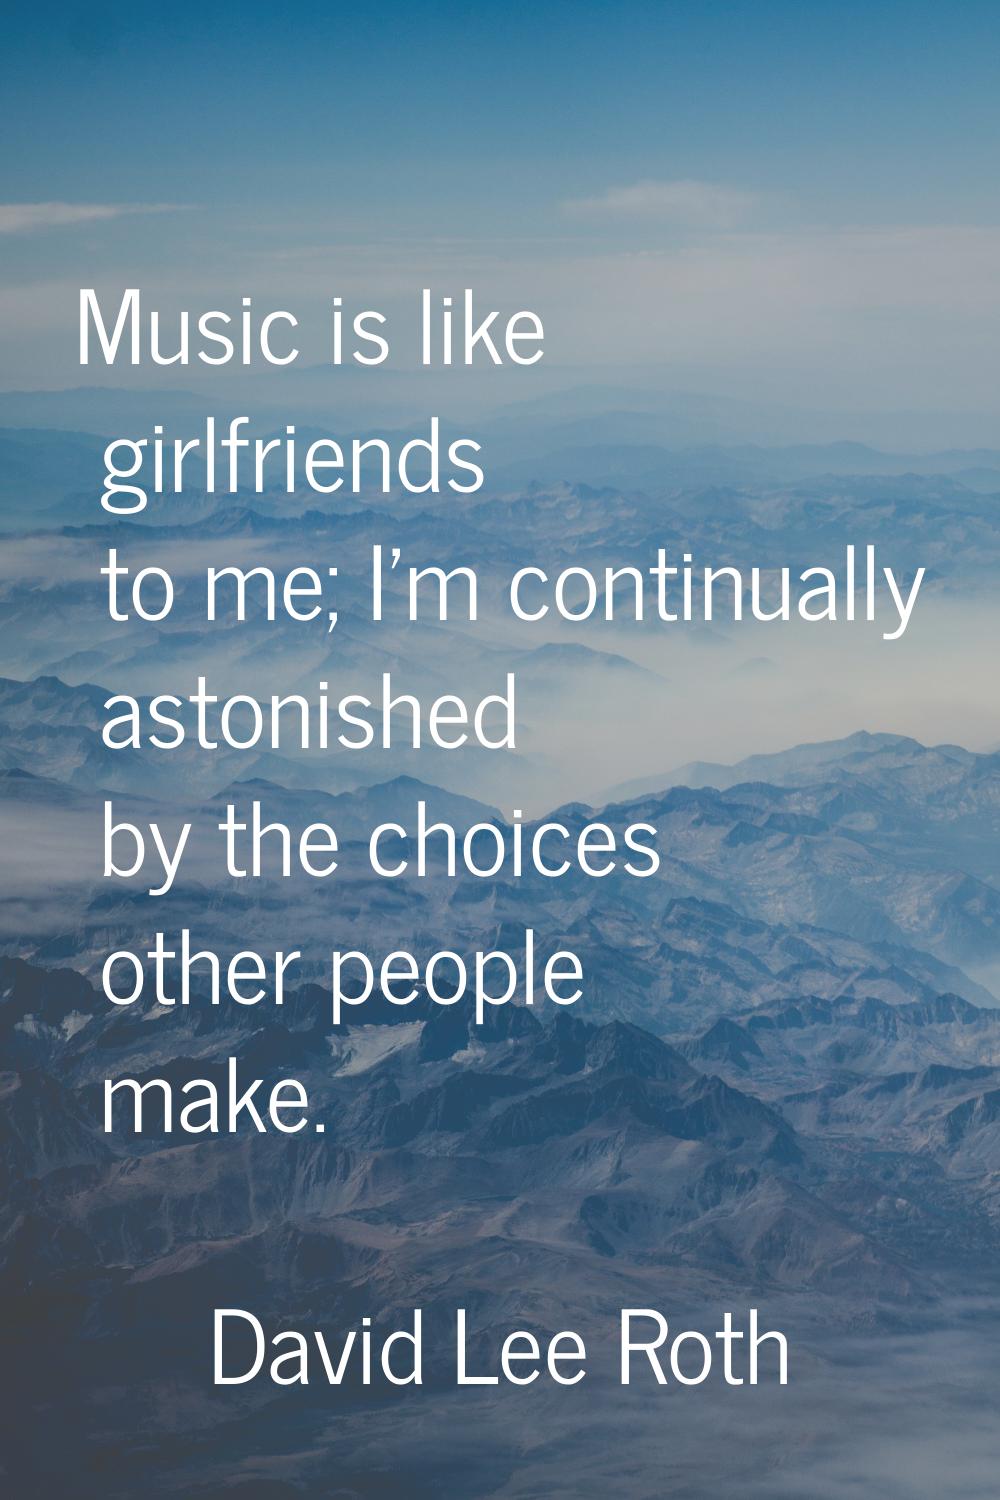 Music is like girlfriends to me; I'm continually astonished by the choices other people make.